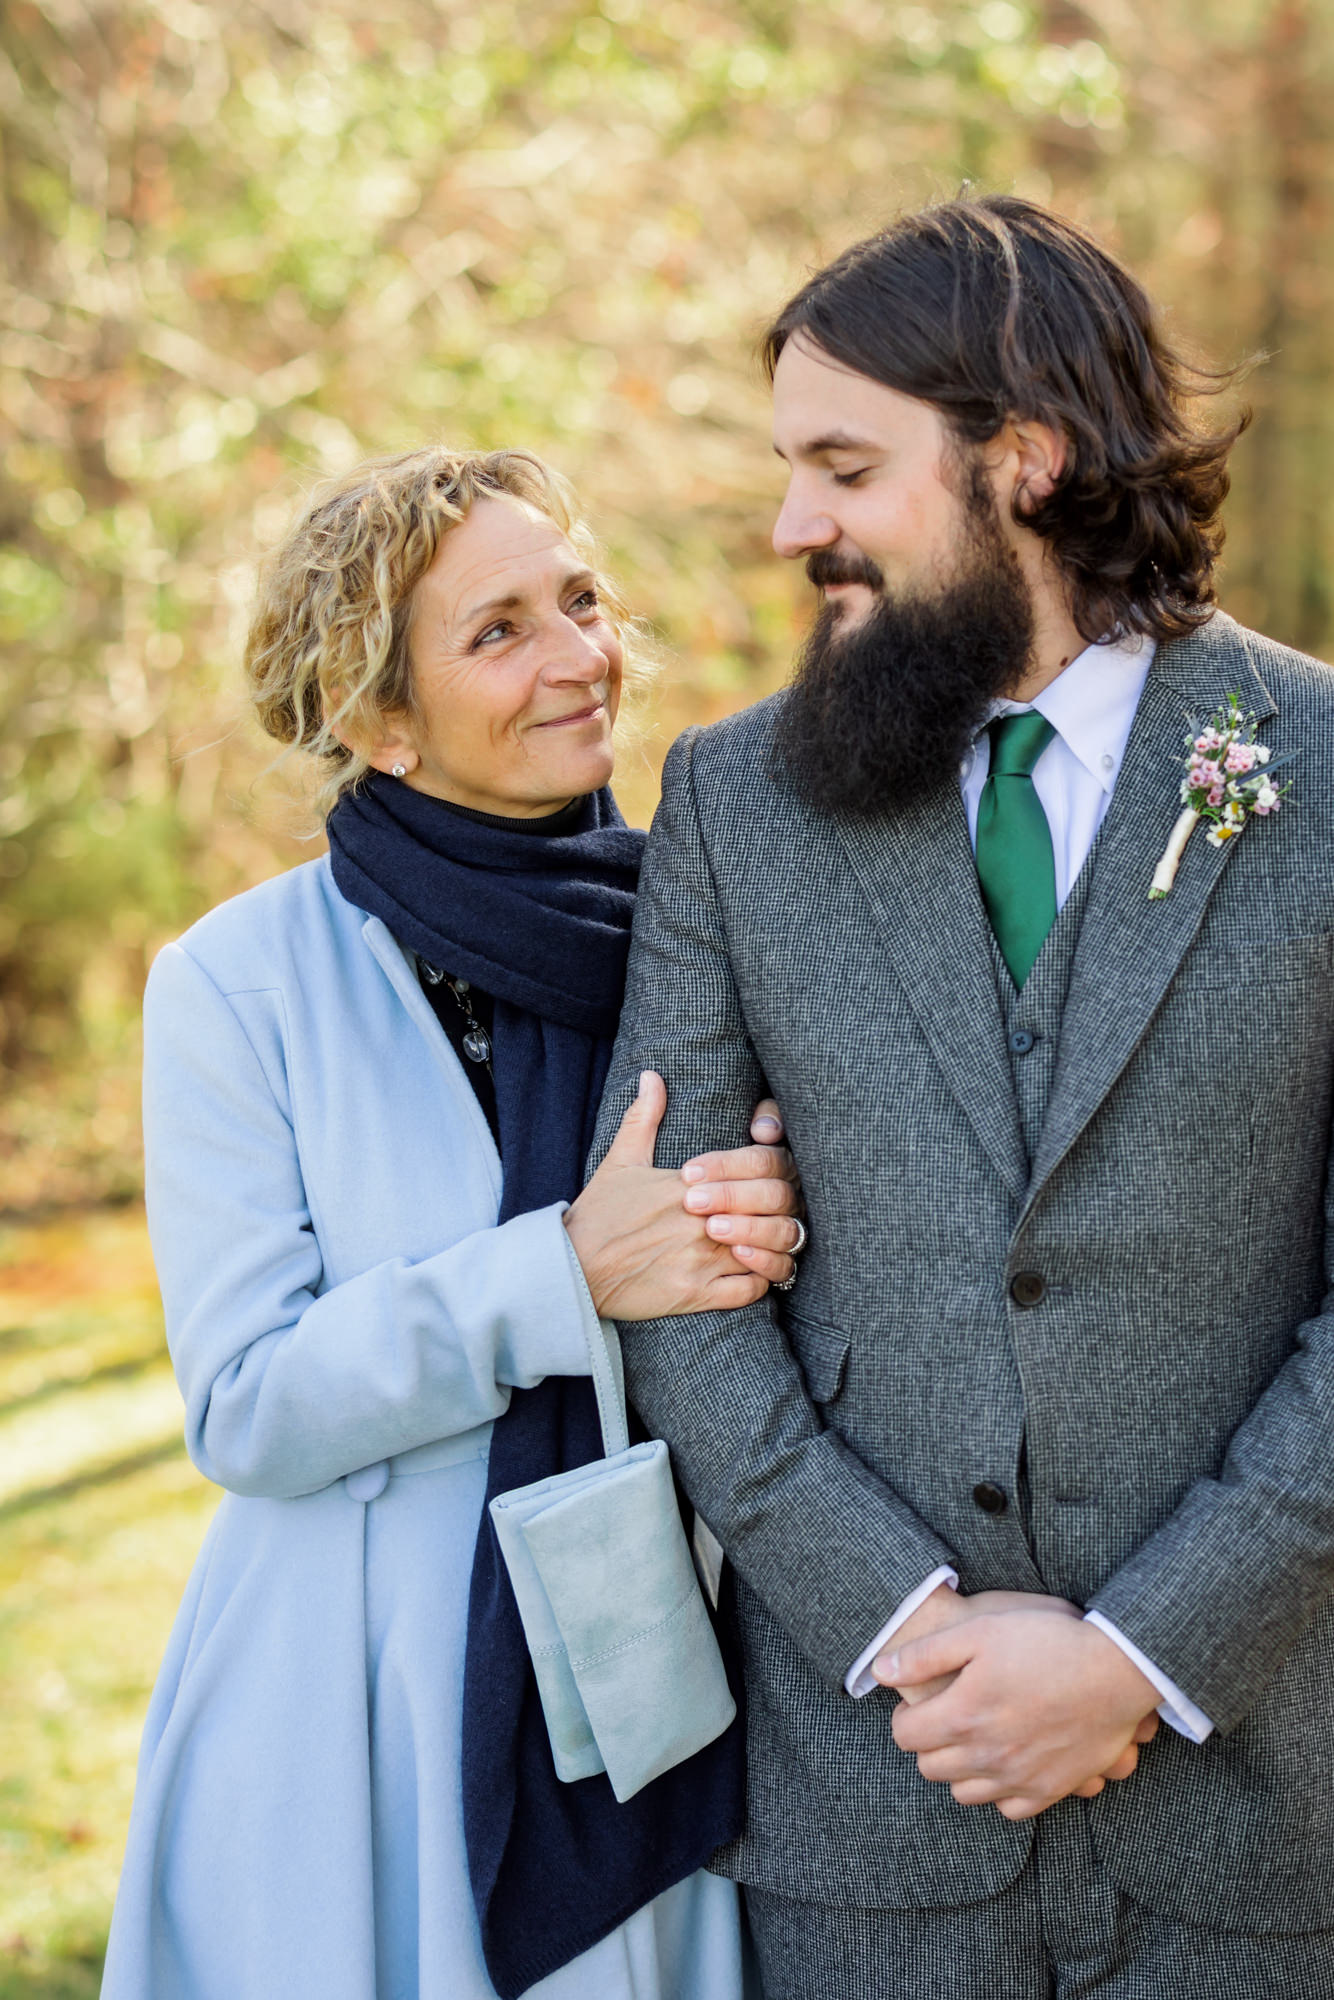 groom with mother before wedding ceremony wearing gray suit and emerald tie